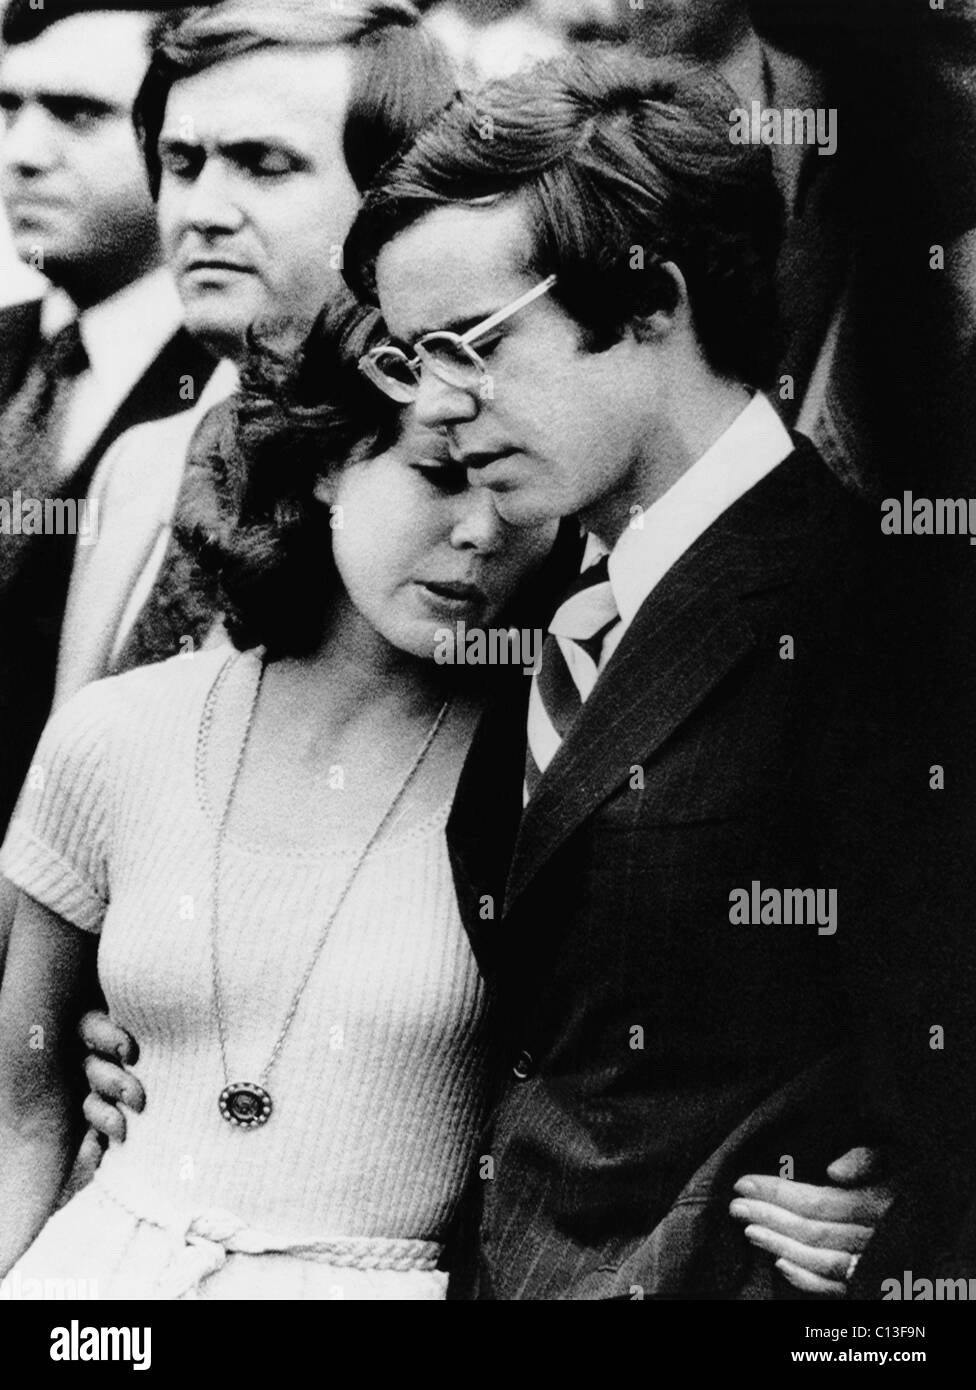 Julie Nixon Eisenhower, left, and David Eisenhower, watch Richard Nixon leave the White House after resigning, August 9, 1974 Stock Photo